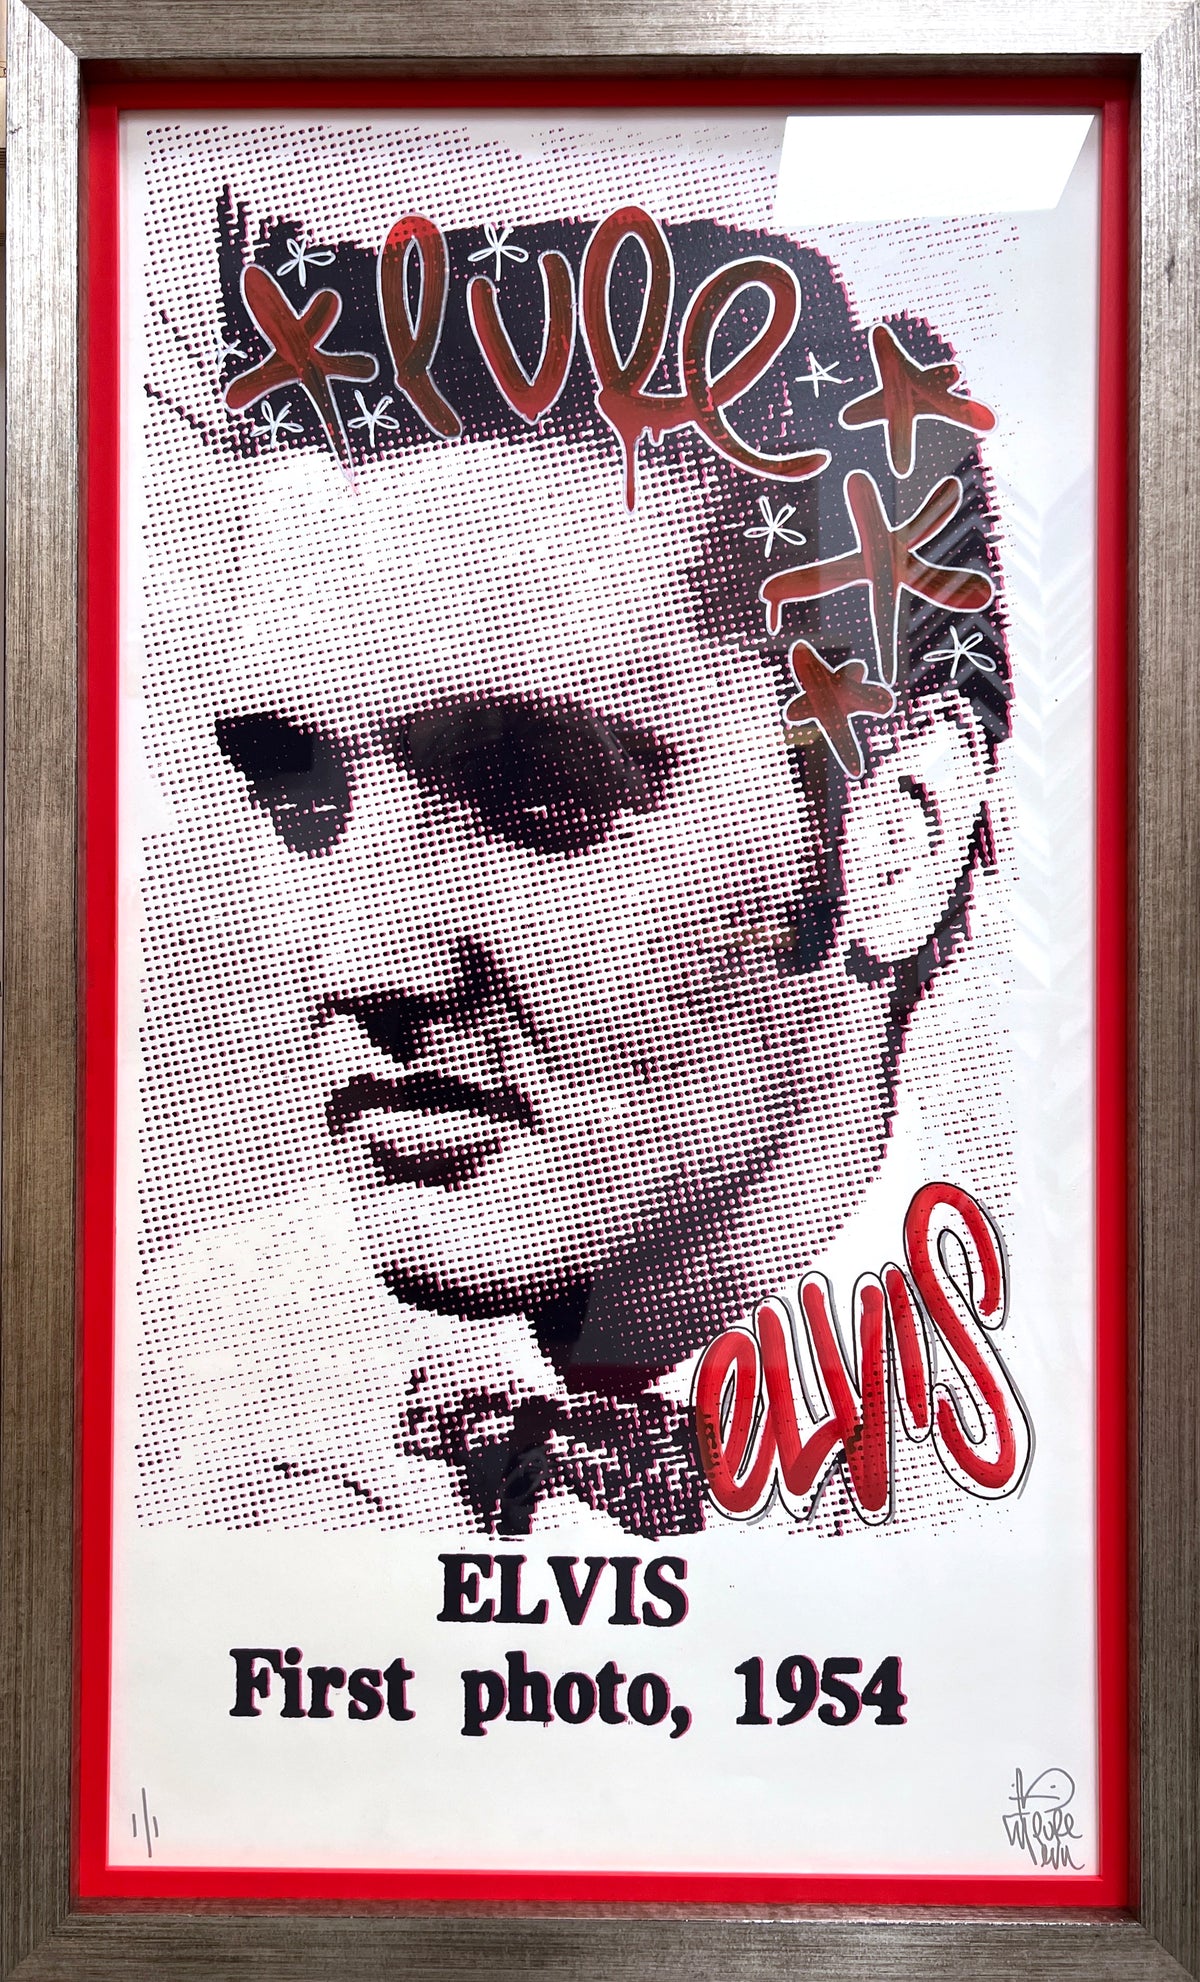 ELVIS First photo, 1954 - Pure Elvis by Pure Evil